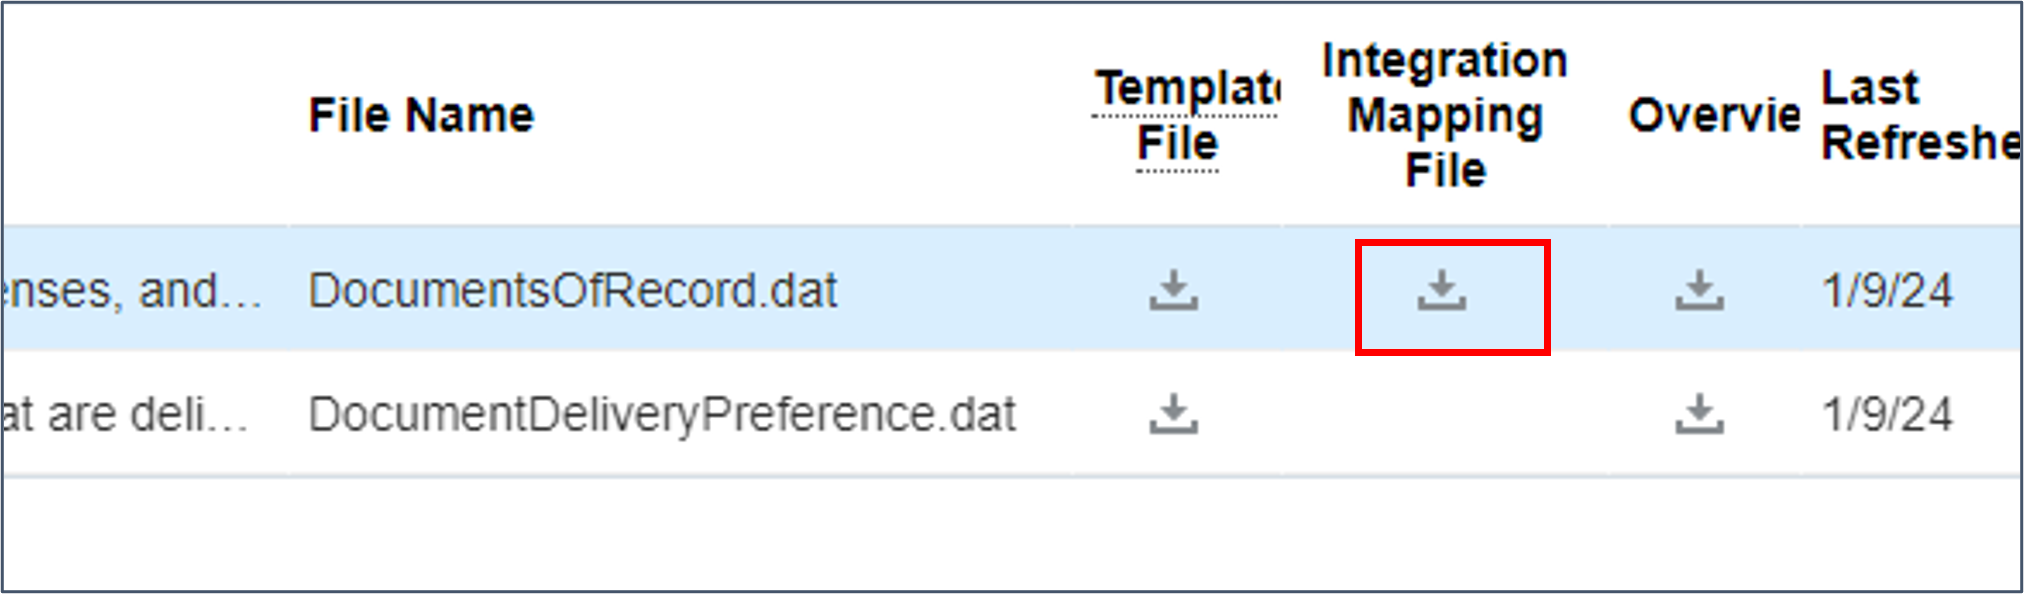 Refresh the table until the download file icon appears for the Document Record object.